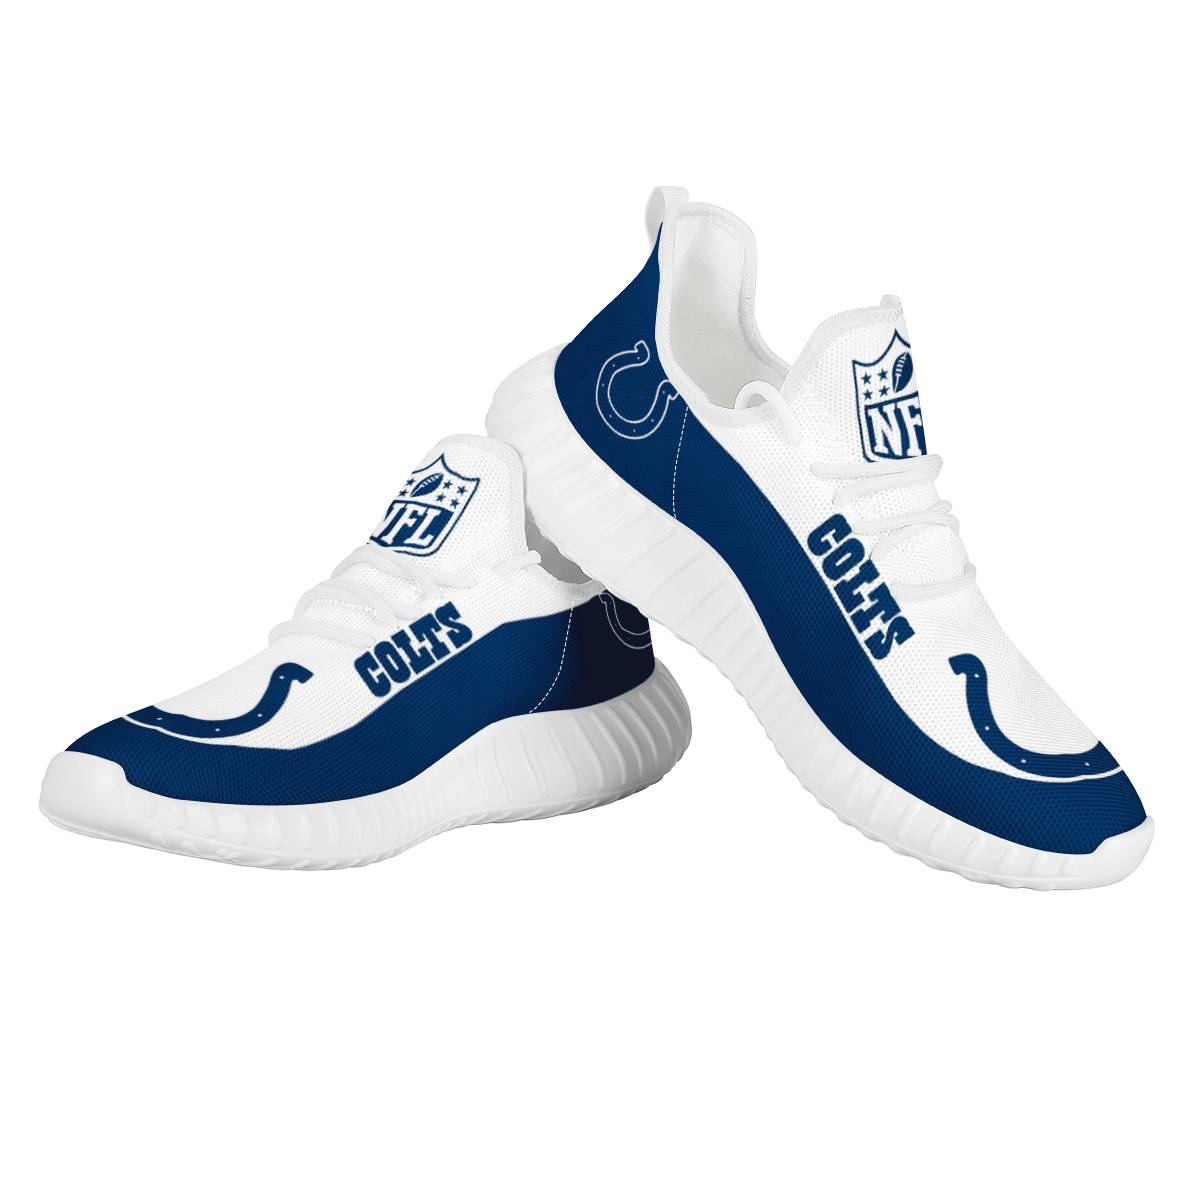 Men's Indianapolis Colts Mesh Knit Sneakers/Shoes 003